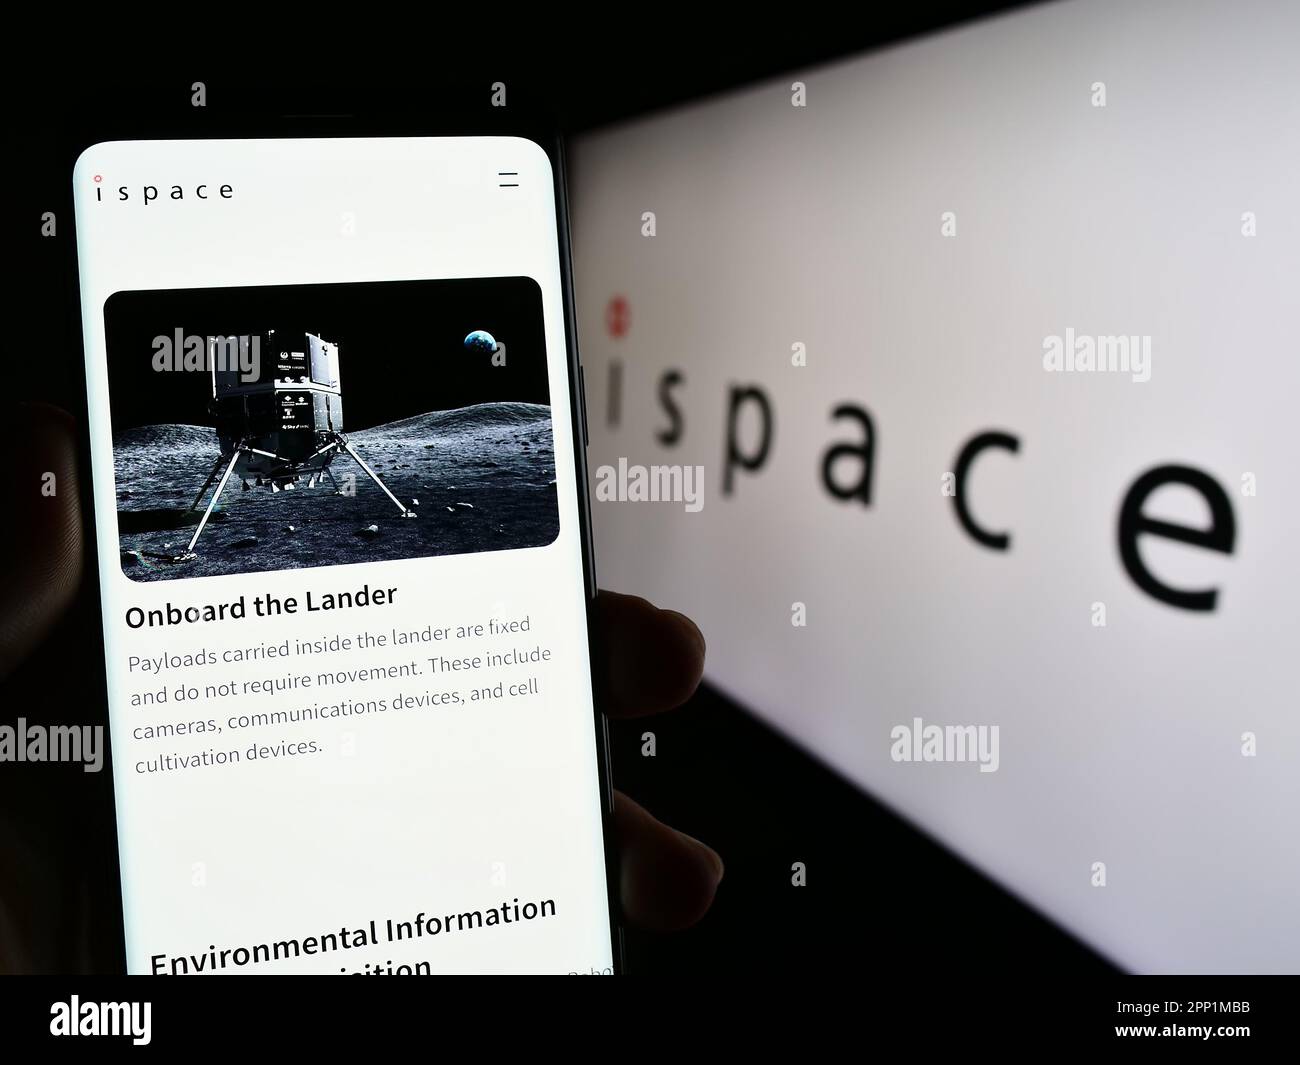 Person holding smartphone with web page of Japanese aerospace company ispace Inc. on screen in front of logo. Focus on center of phone display. Stock Photo